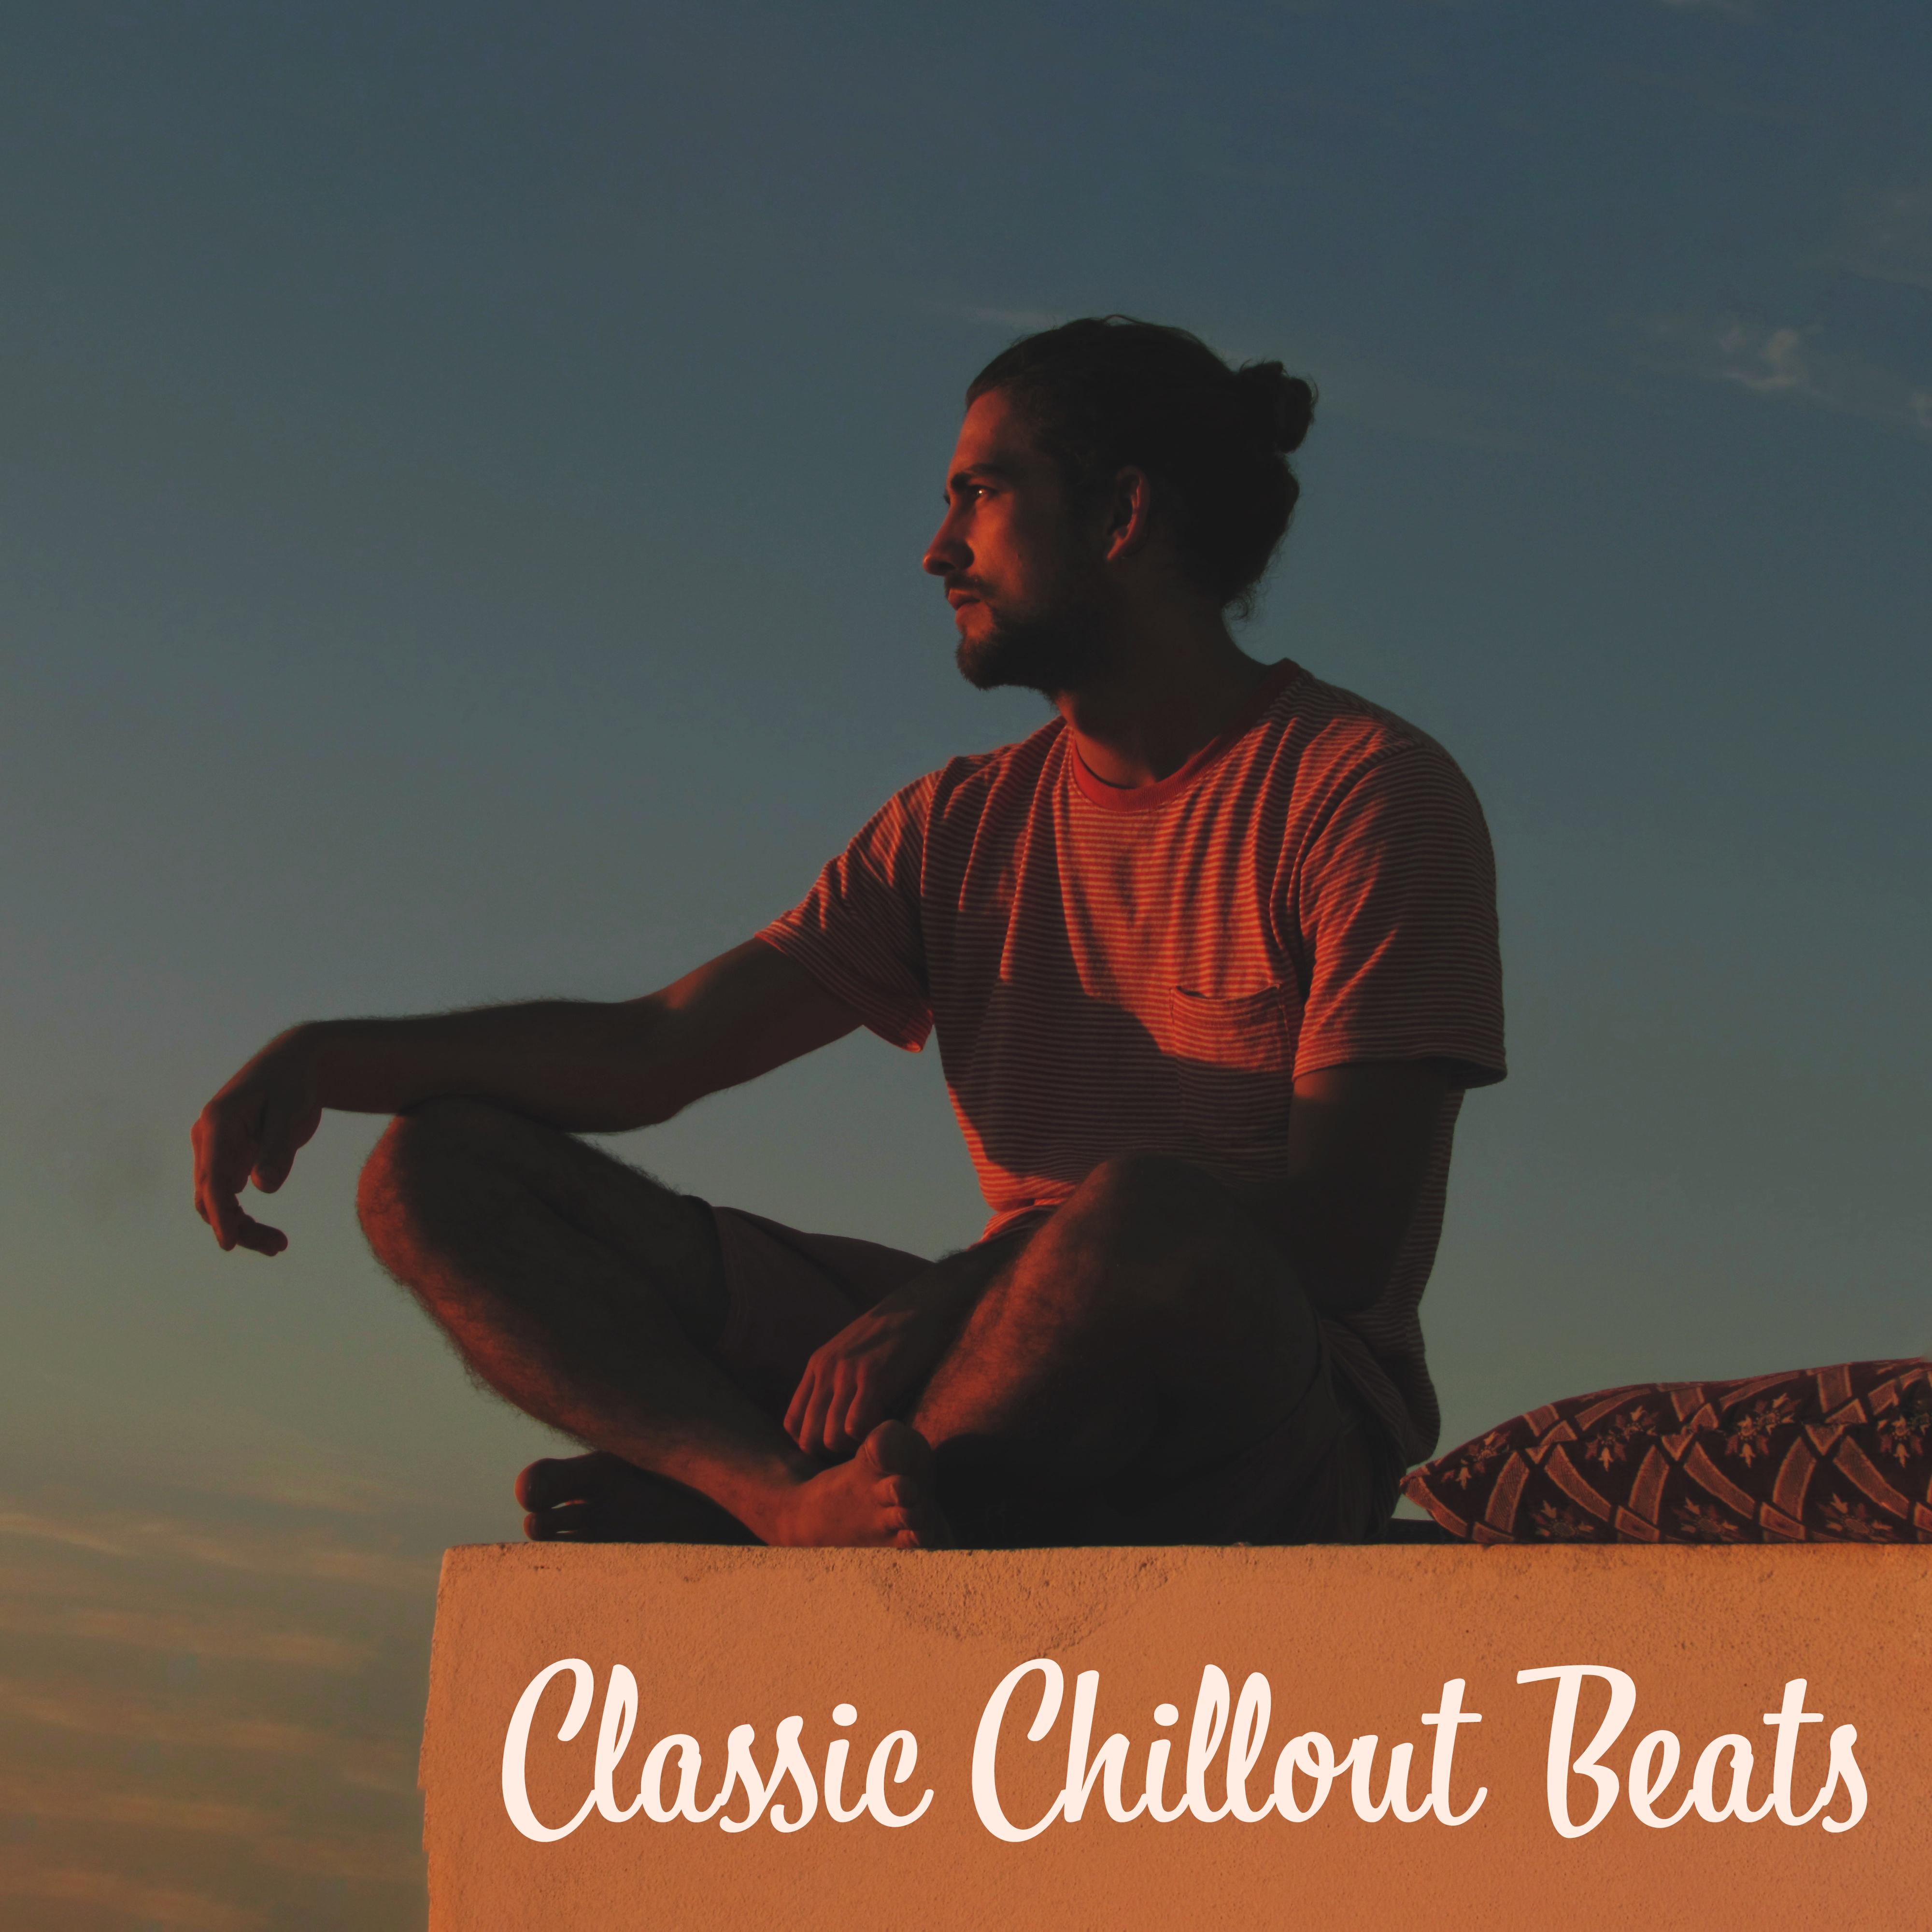 Classic Chillout Beats